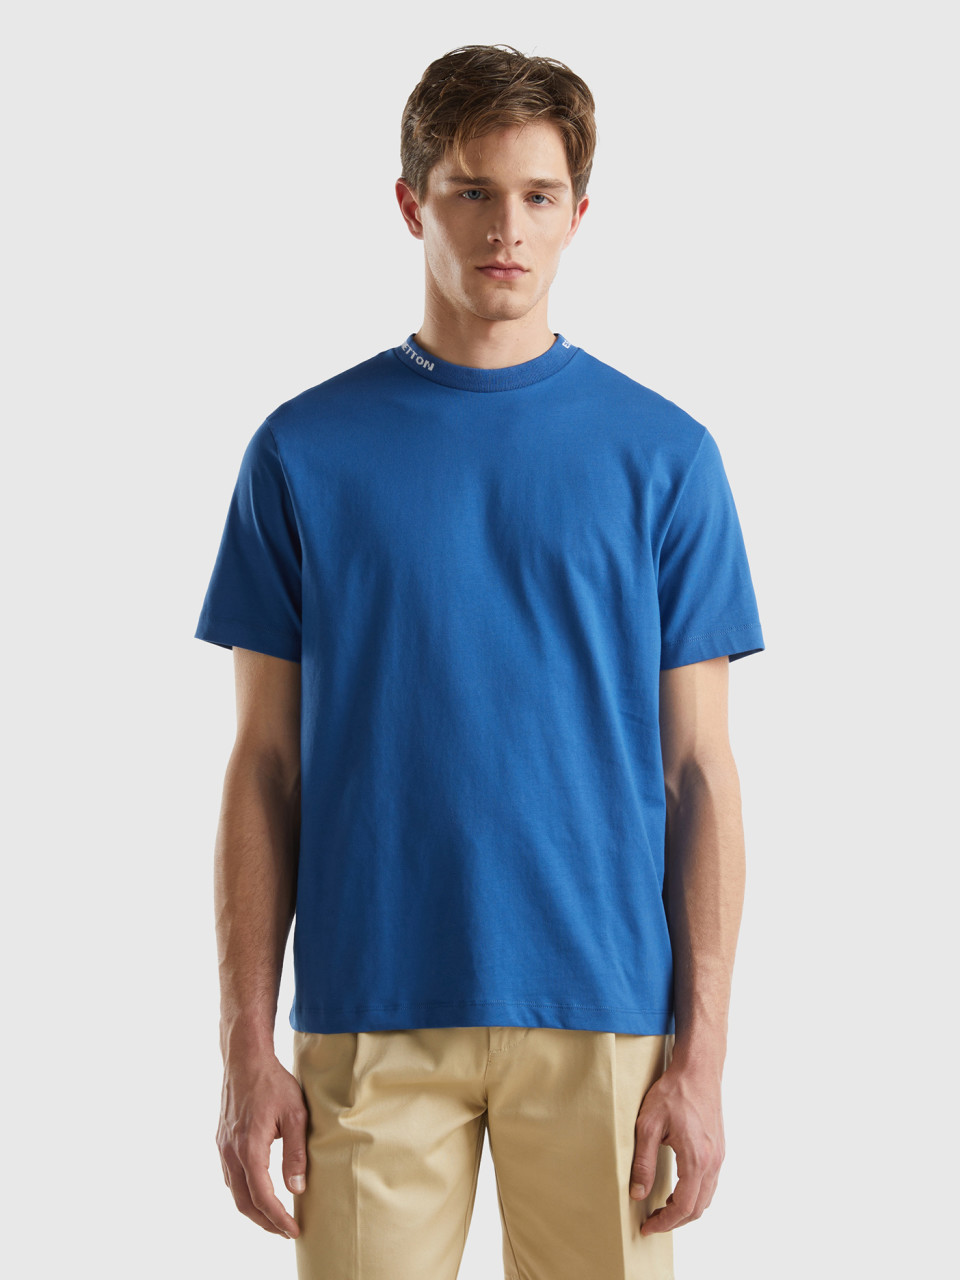 Benetton, Blue T-shirt With Embroidery On The Neck, Blue, Men